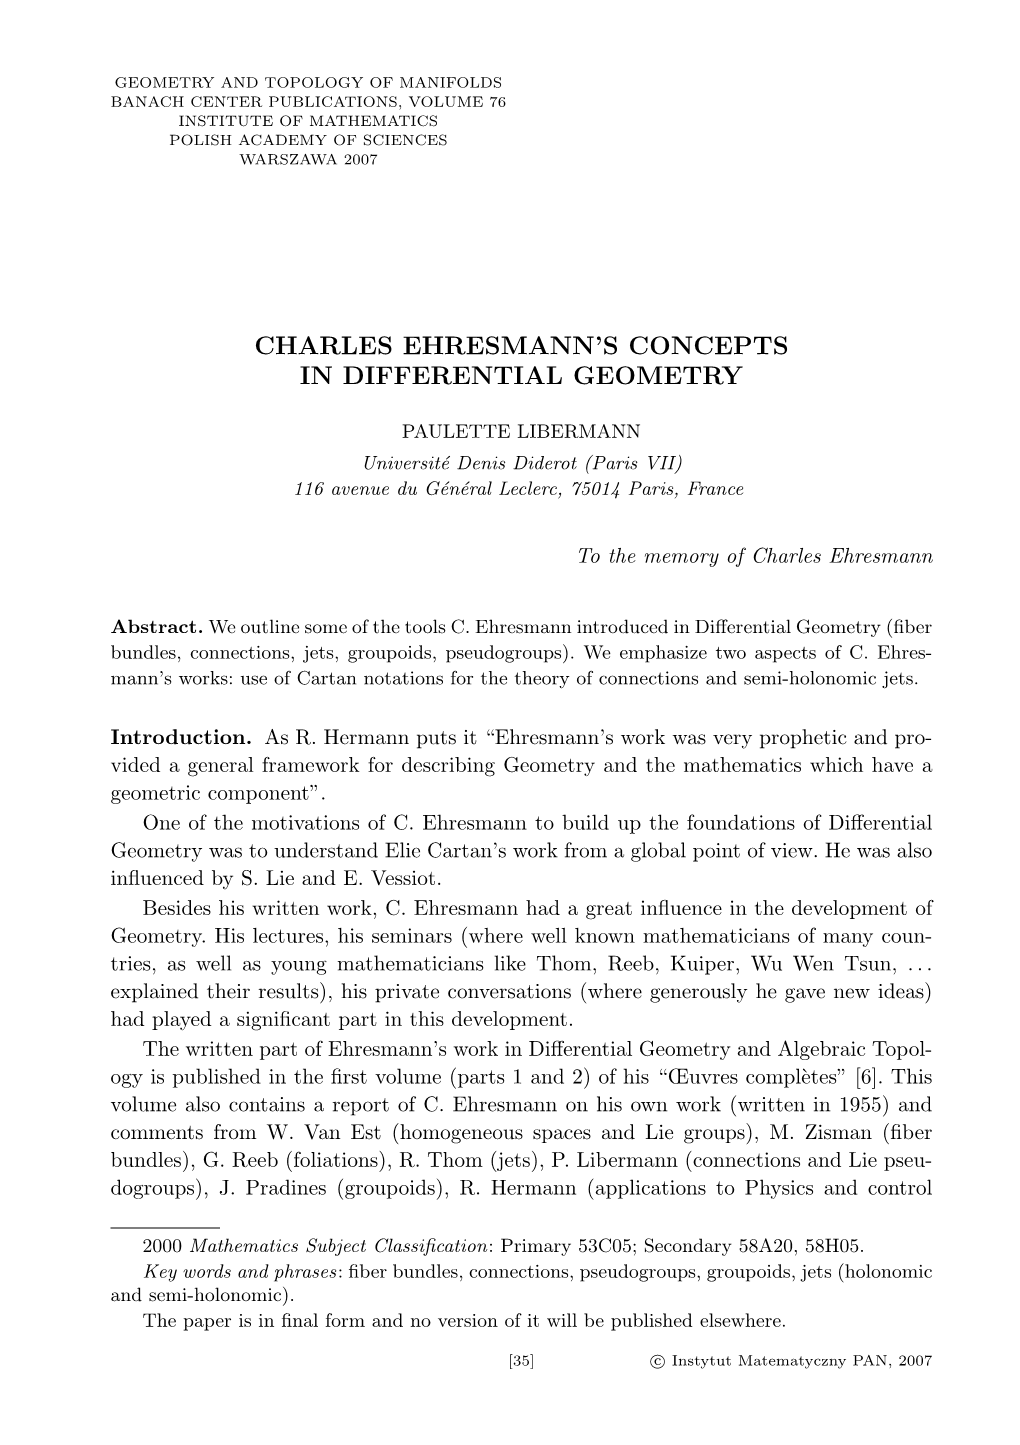 Charles Ehresmann's Concepts in Differential